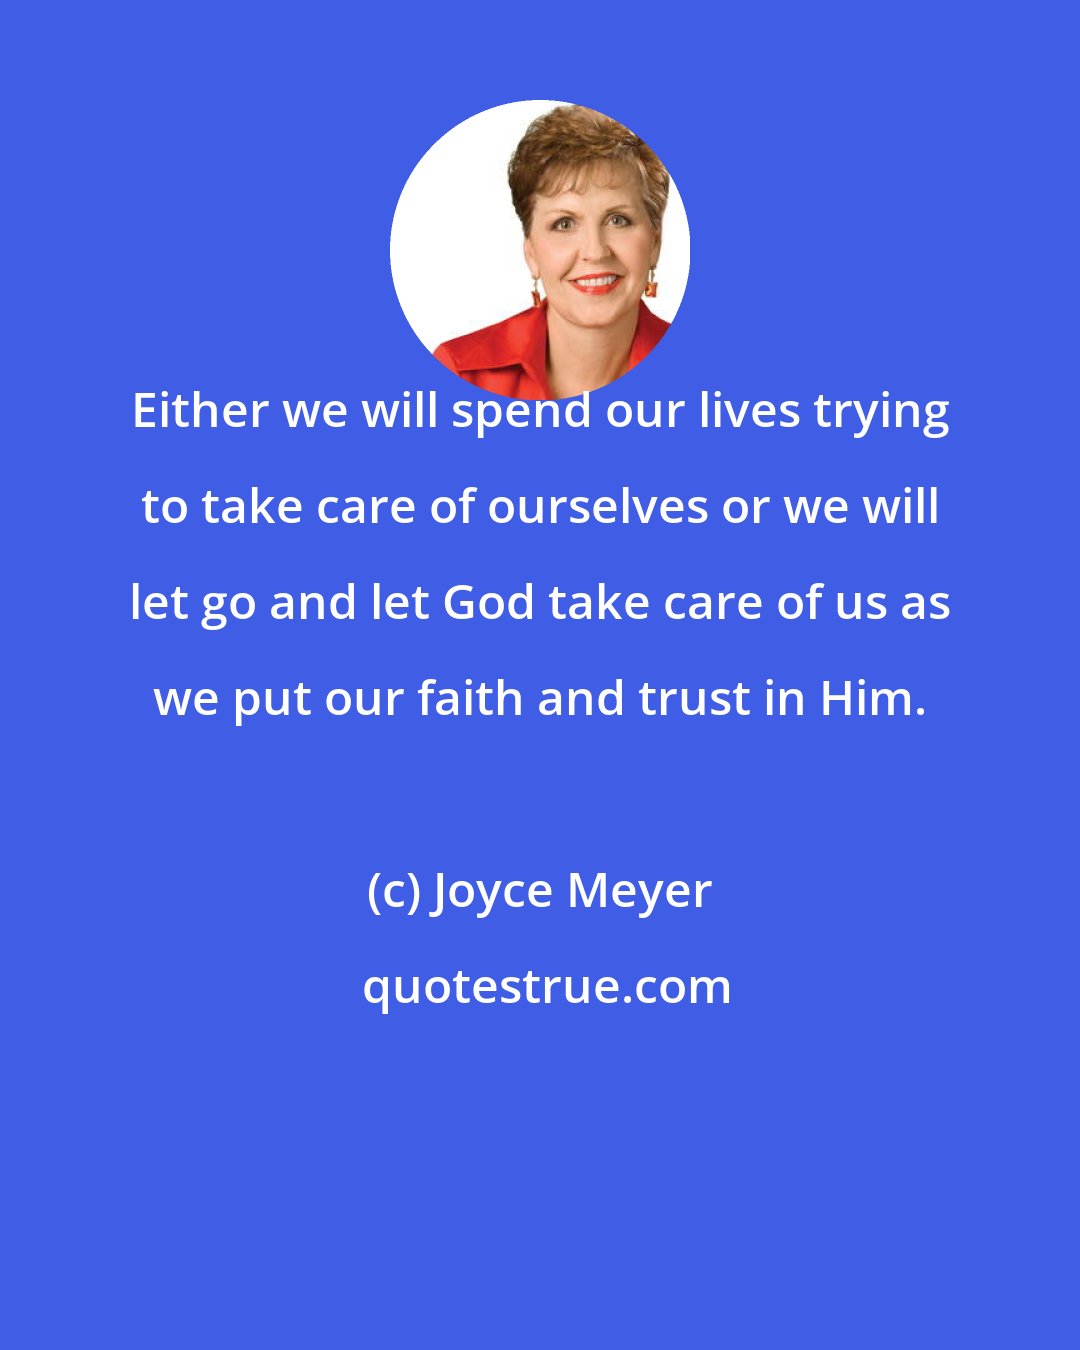 Joyce Meyer: Either we will spend our lives trying to take care of ourselves or we will let go and let God take care of us as we put our faith and trust in Him.